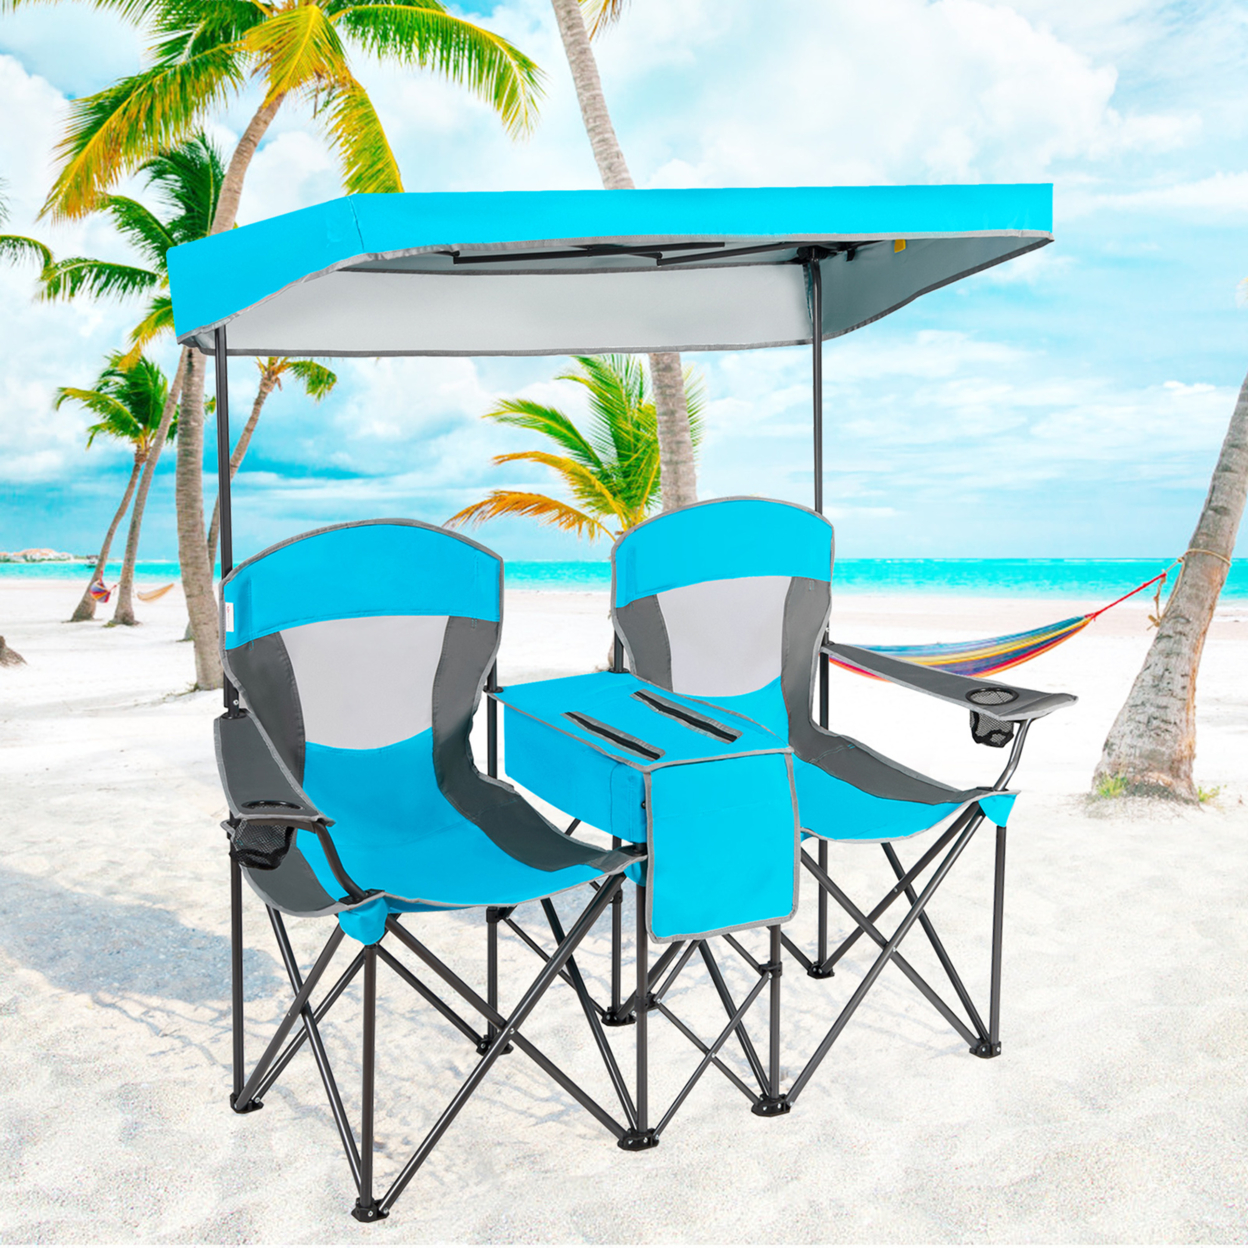 Folding 2-person Camping Chairs Double Sunshade Chairs W/ Canopy Blue/Turquoise/Red - Blue